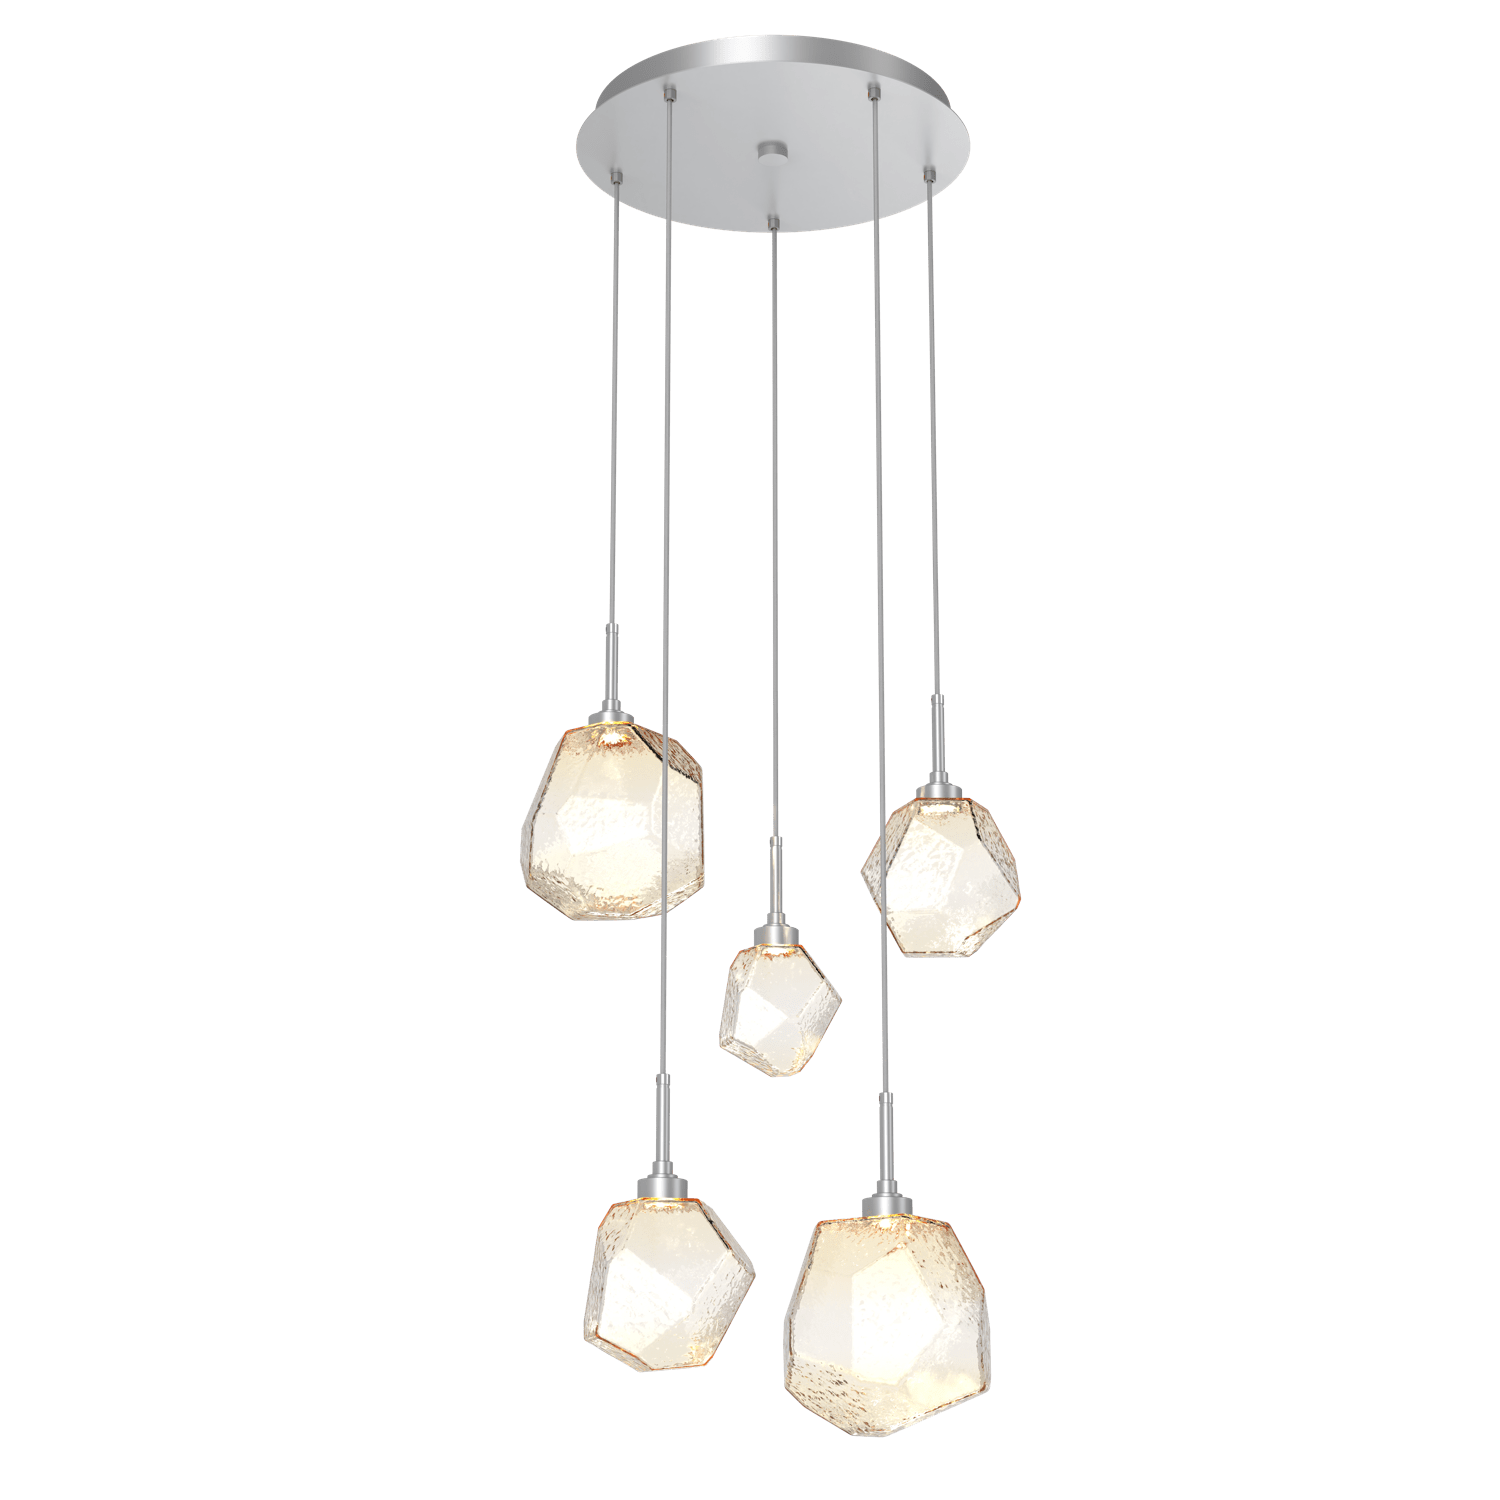 CHB0039-05-CS-A-Hammerton-Studio-Gem-5-light-round-pendant-chandelier-with-classic-silver-finish-and-amber-blown-glass-shades-and-LED-lamping